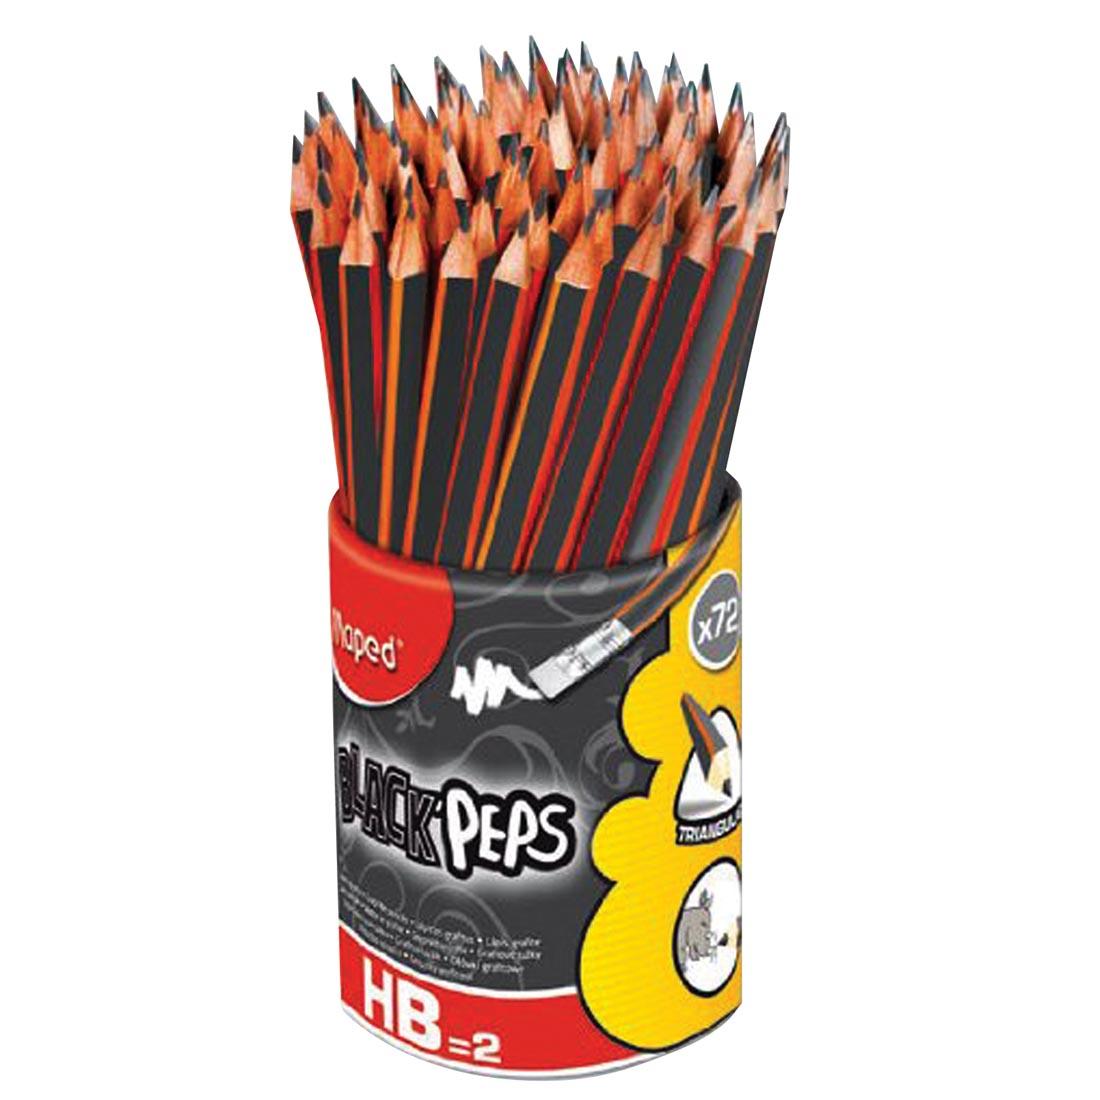 Maped Black'Peps Graphite Pencils 72-Count Canister